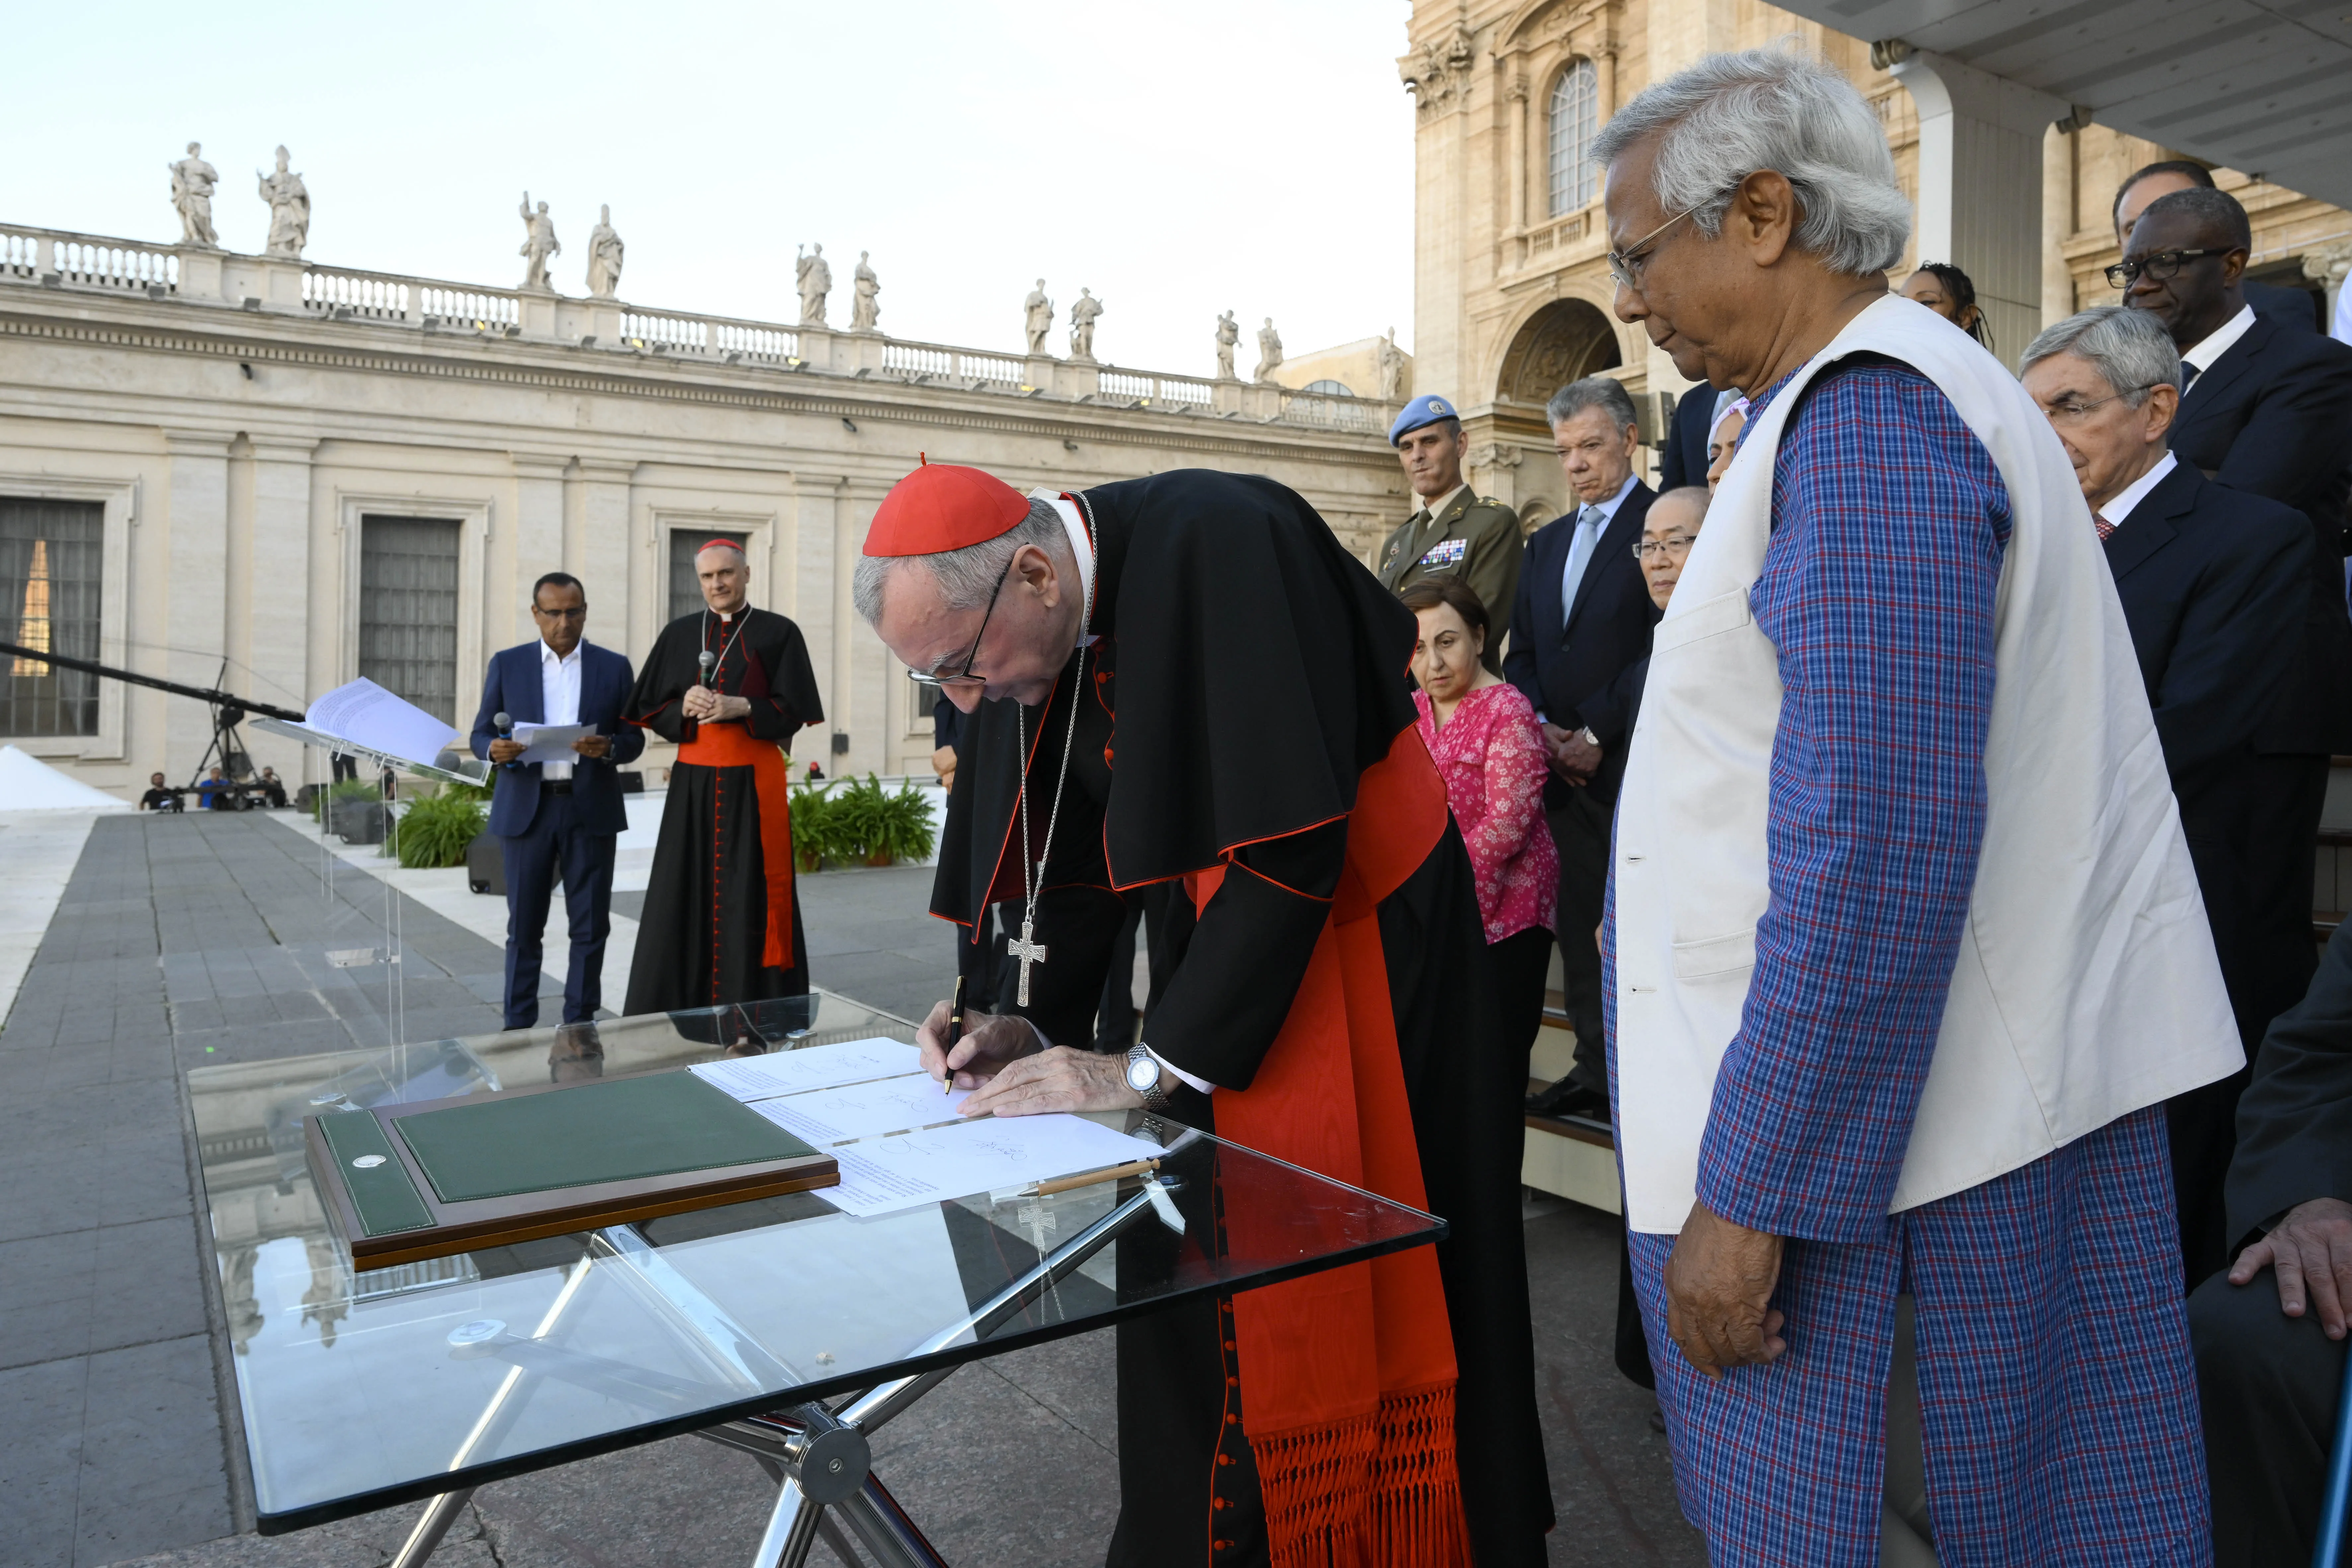 Cardinal Pietro Parolin signs a declaration on human fraternity on behalf of Pope Francis while Muhammad Yunus, winner of the Nobel Peace Prize in 2006, and other Nobel laureates, look on, during the #NotAlone human fraternity event in St. Peter's Square June 10, 2023. Vatican Media.